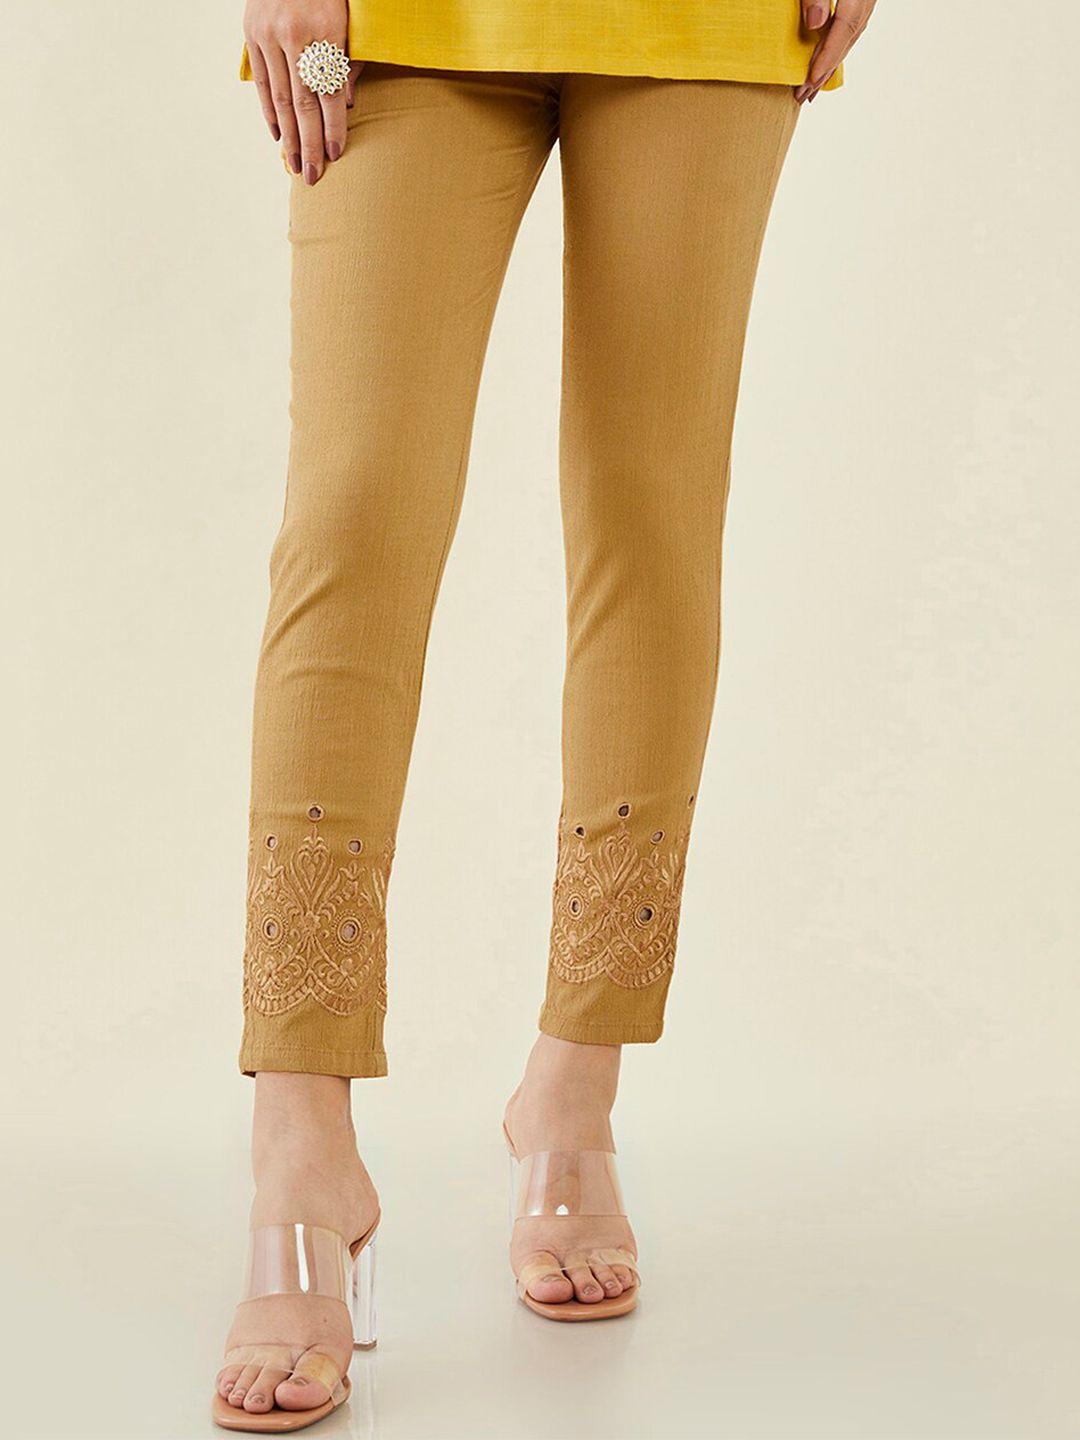 soch cotton ankle-length trousers